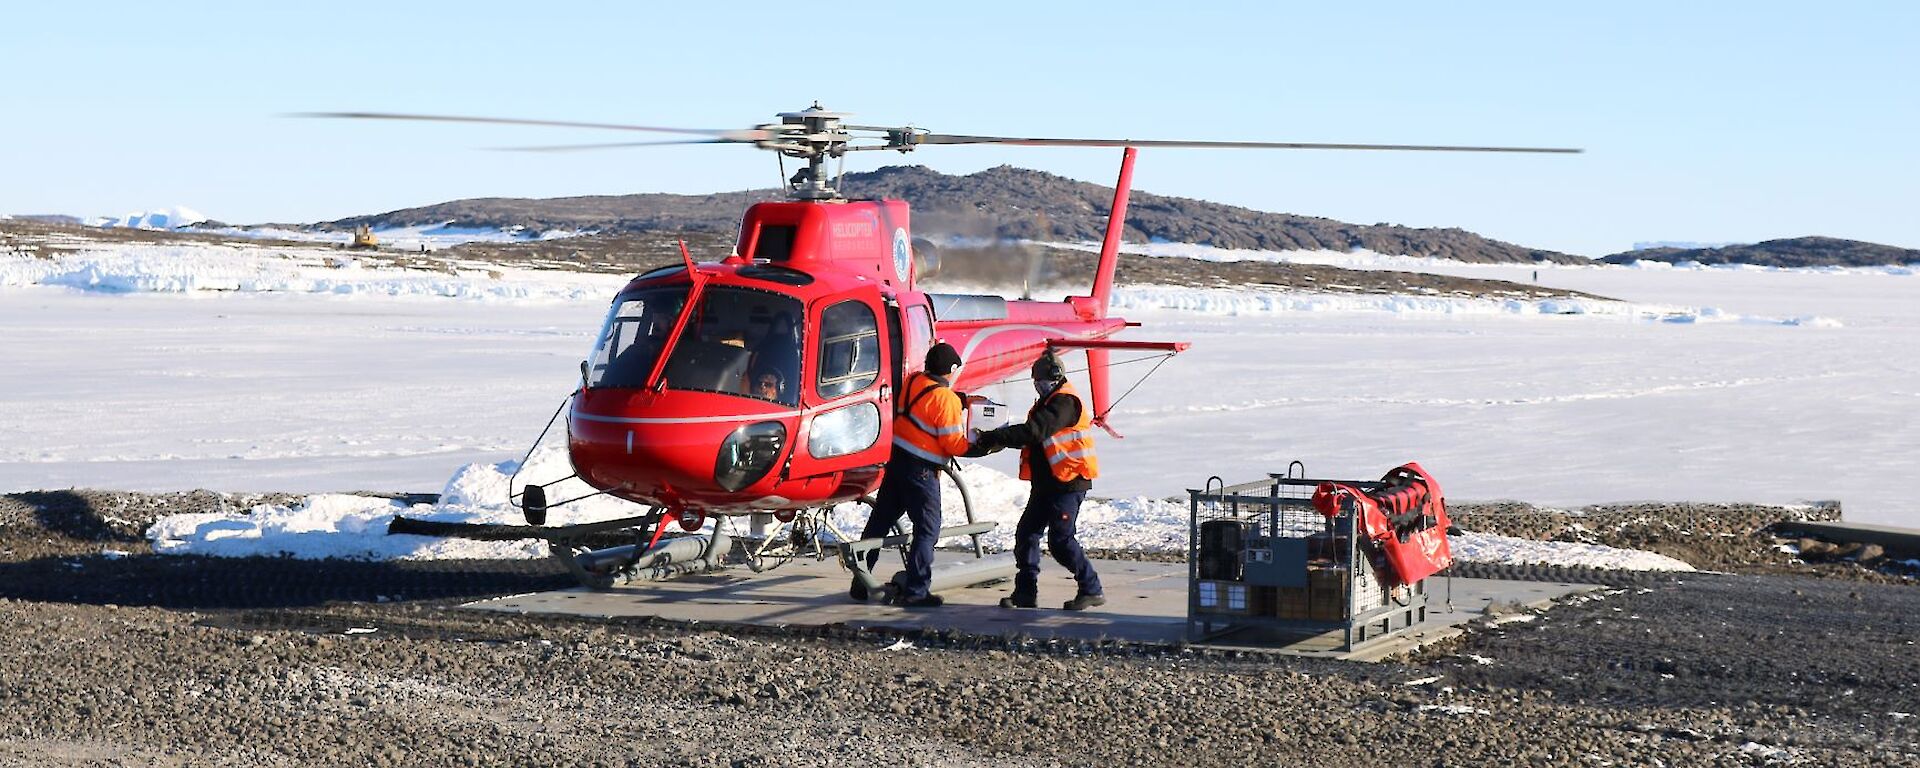 Red helicopter on the landing pad while two people unload the cargo into a cage pallet.